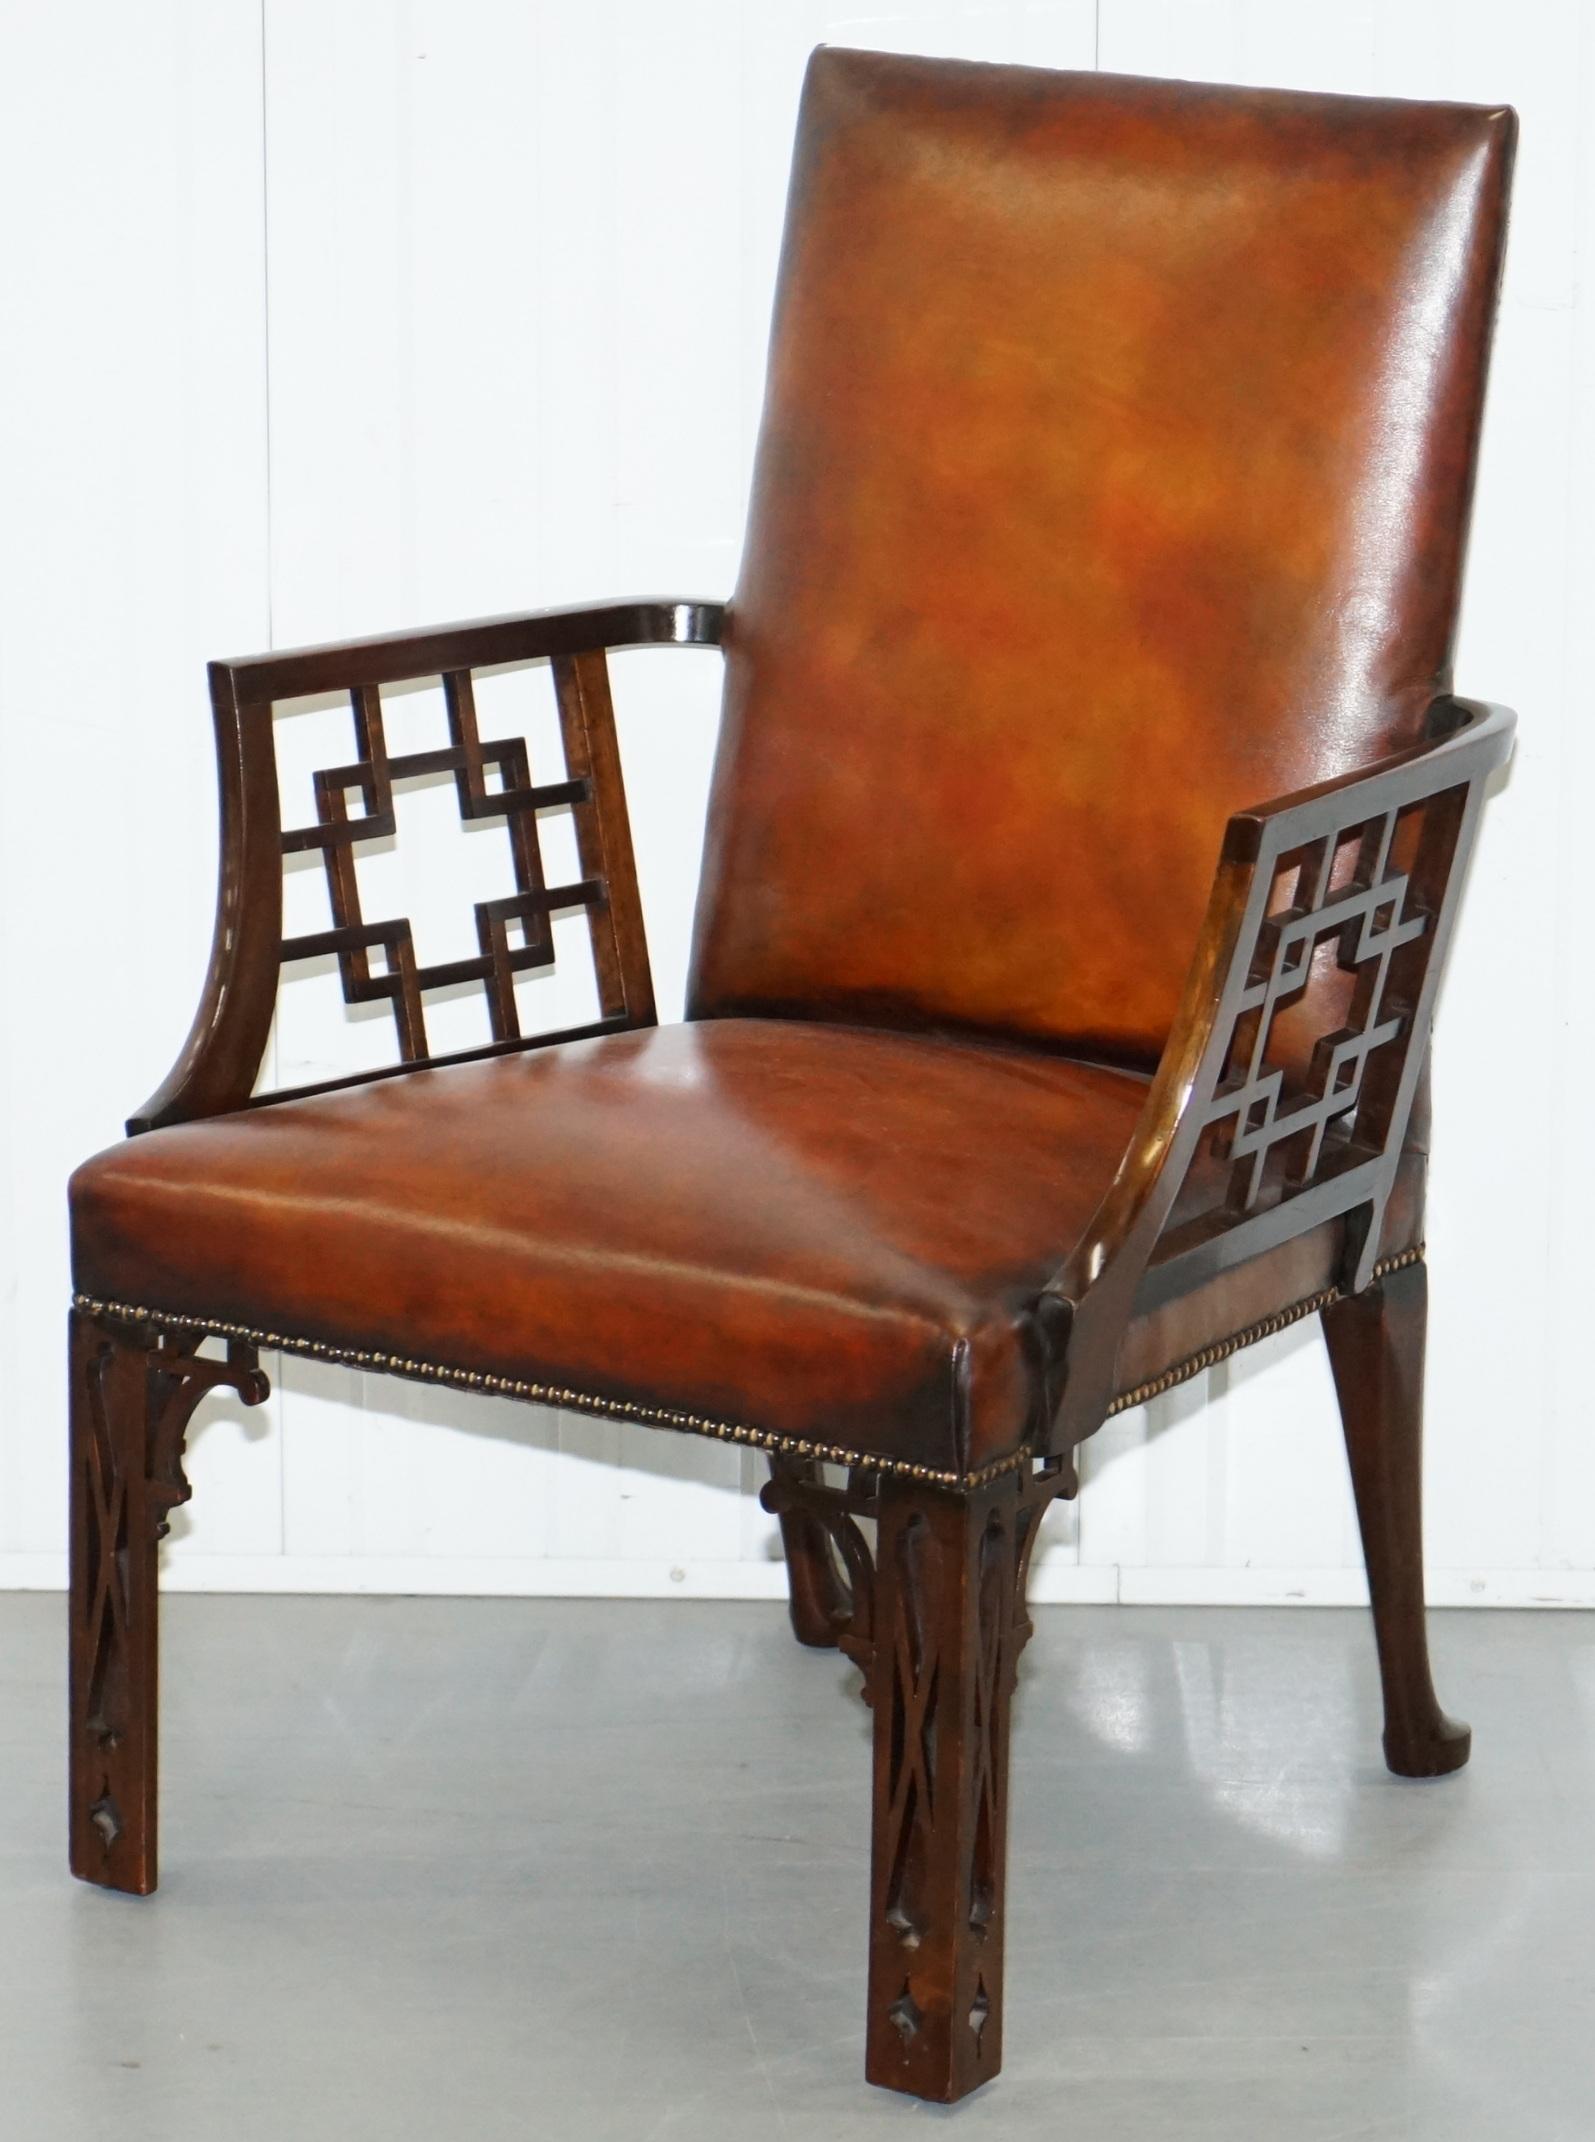 Hand-Crafted Rare circa 1830 Chinese Chippendale Fully Restored Brown Leather Armchair